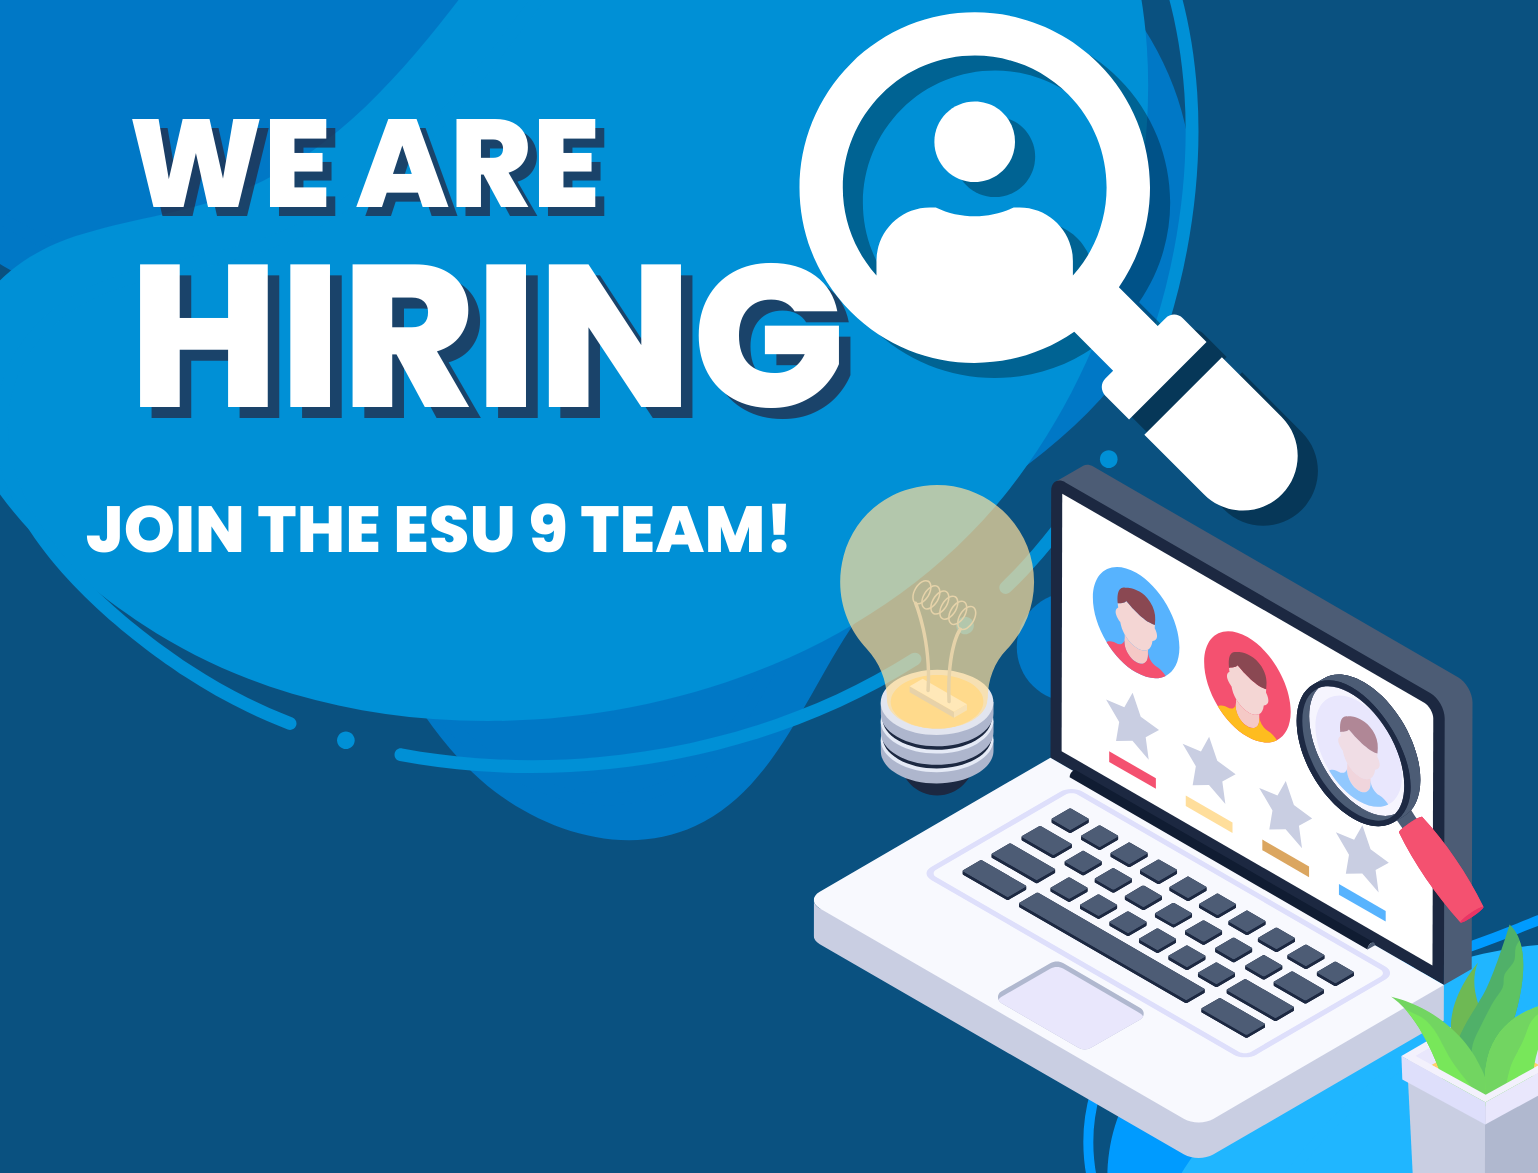 We are hiring! Join the ESU 9 team!